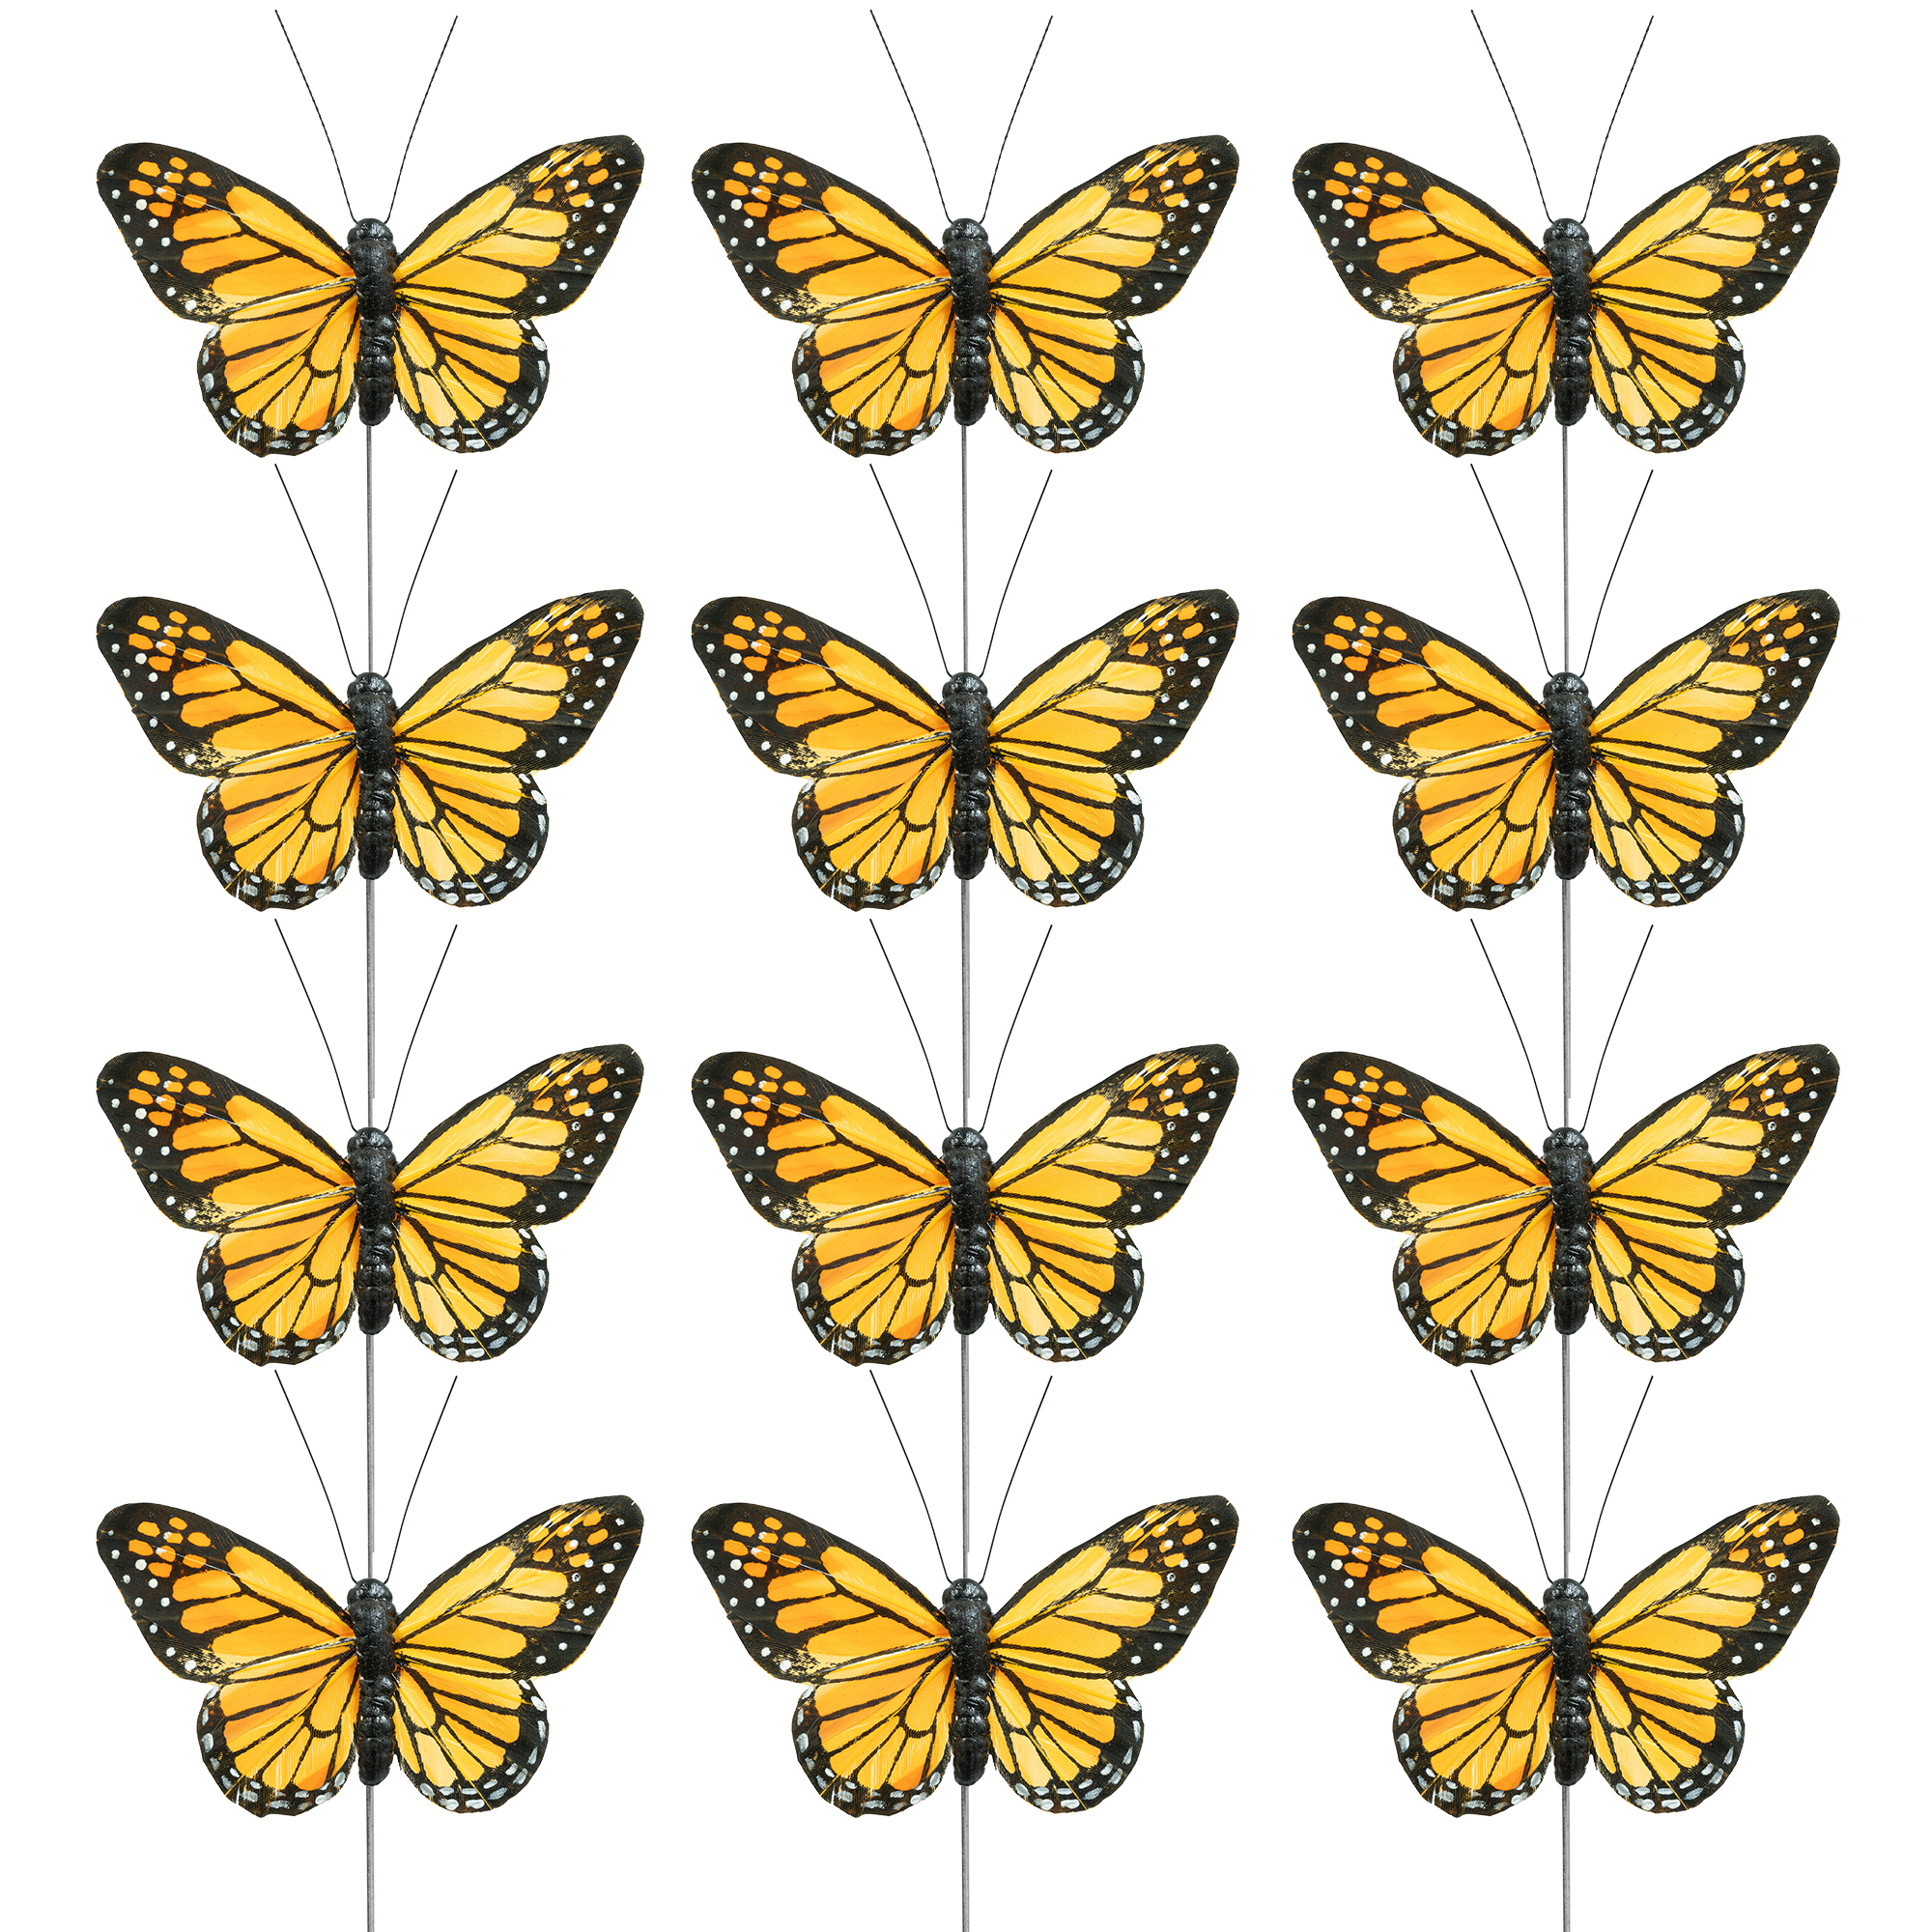 Artificial Monarch Butterfly 2" 12pc/box